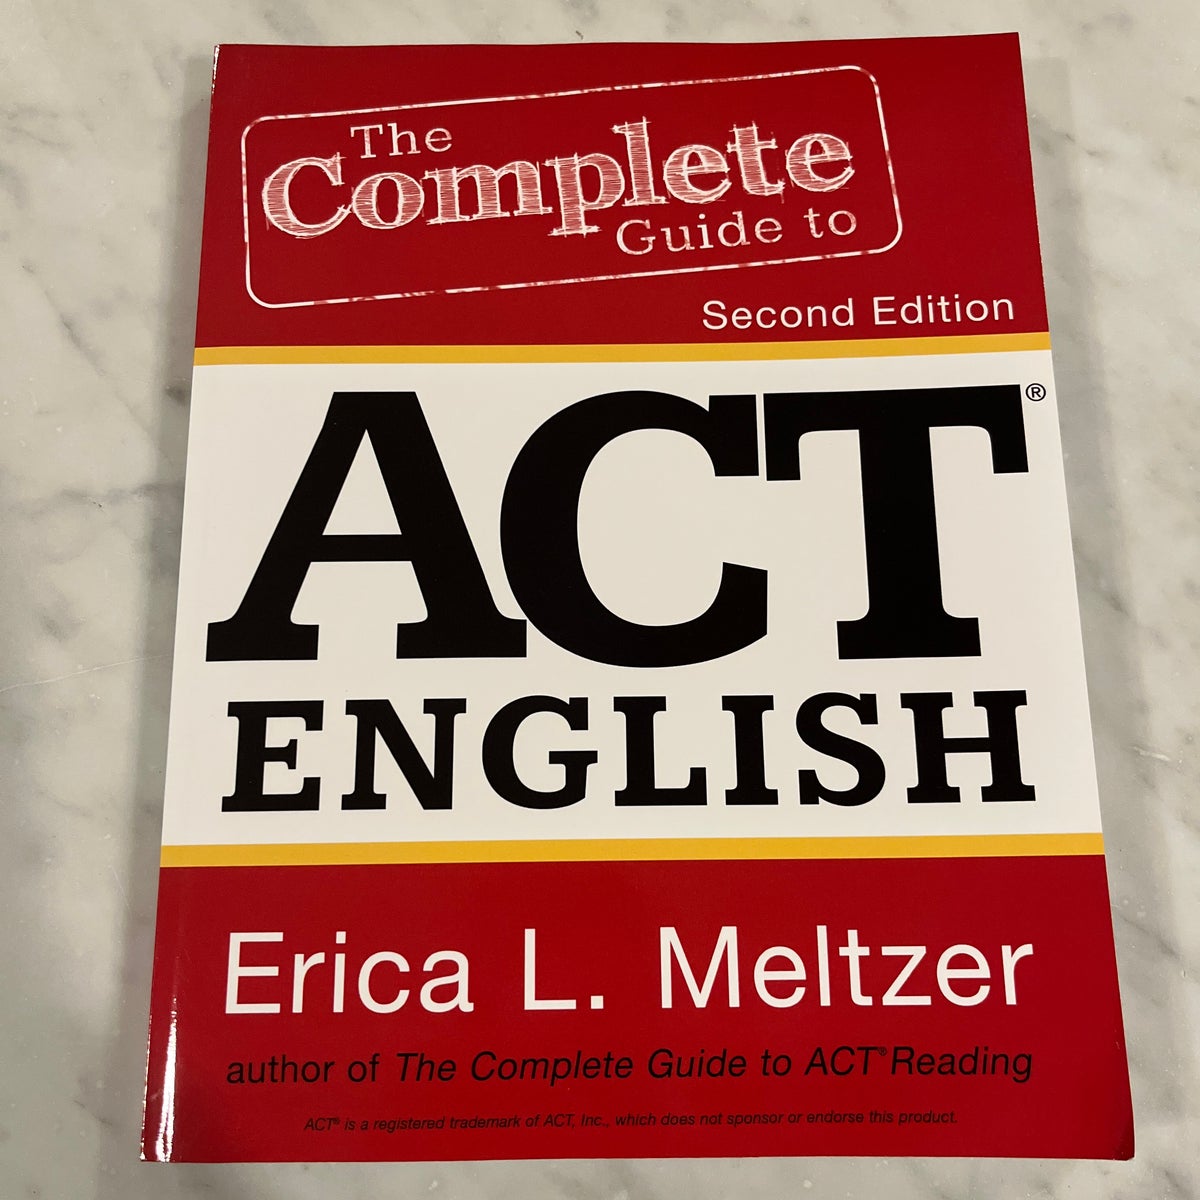 The Complete Guide to ACT English, 2nd Edition by Erica Meltzer, Paperback  | Pangobooks